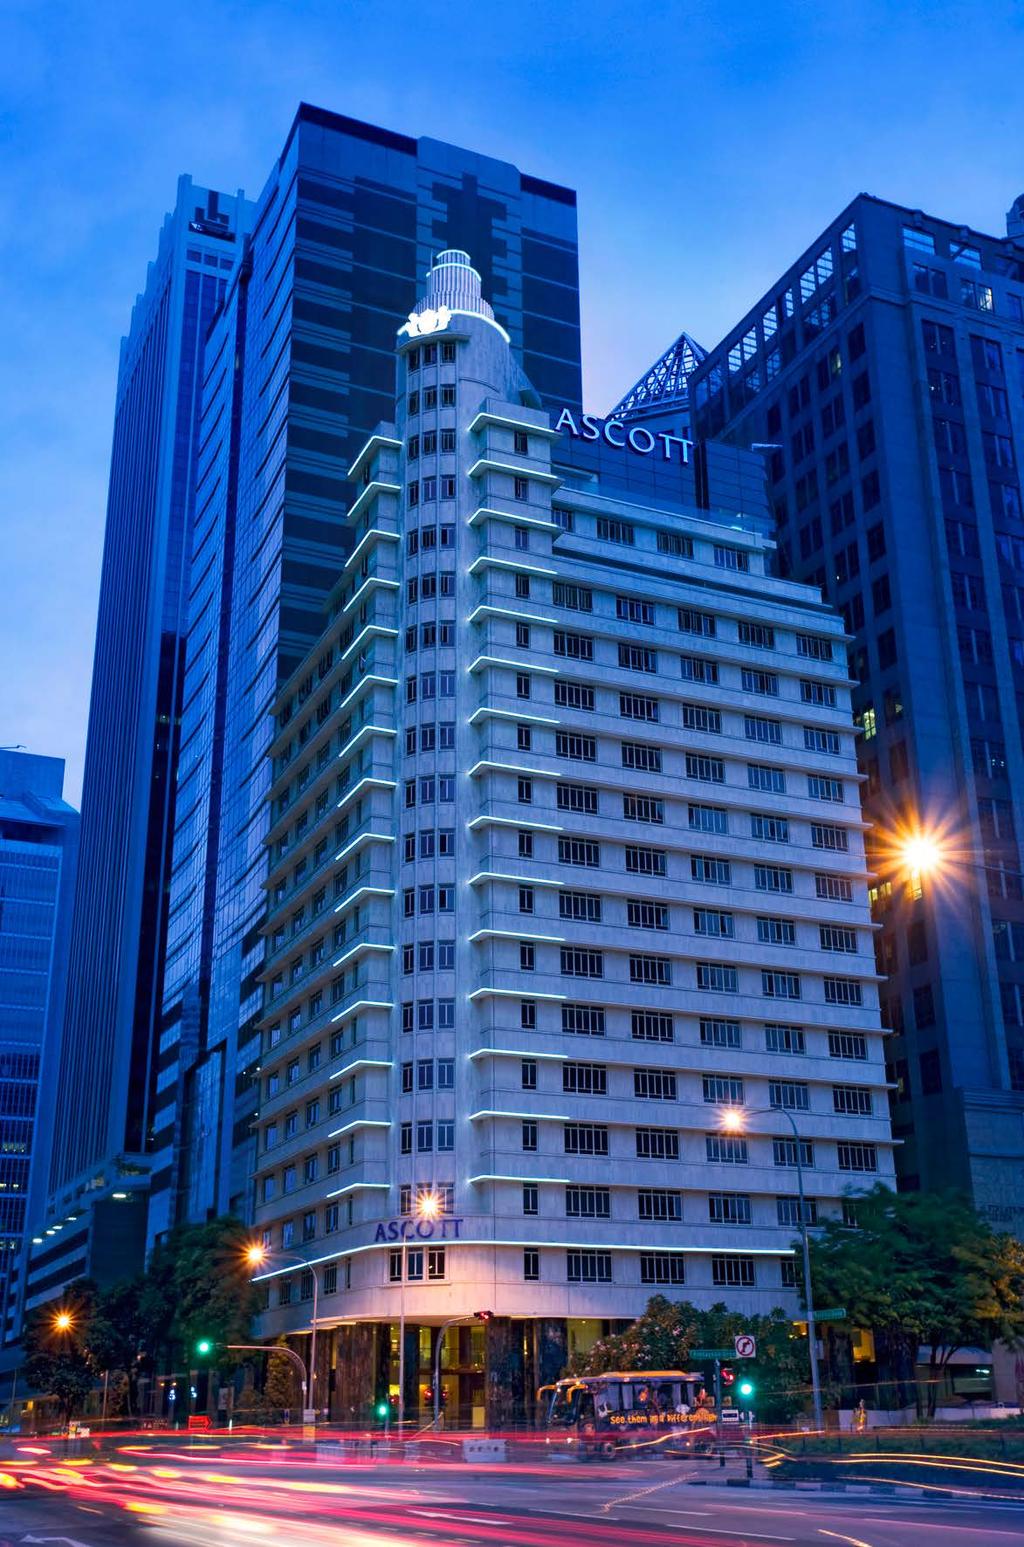 Part owned by the Ascott Group Being backed by a global brand The Ascott Limited is a part owner of Quest Apartment Hotels.